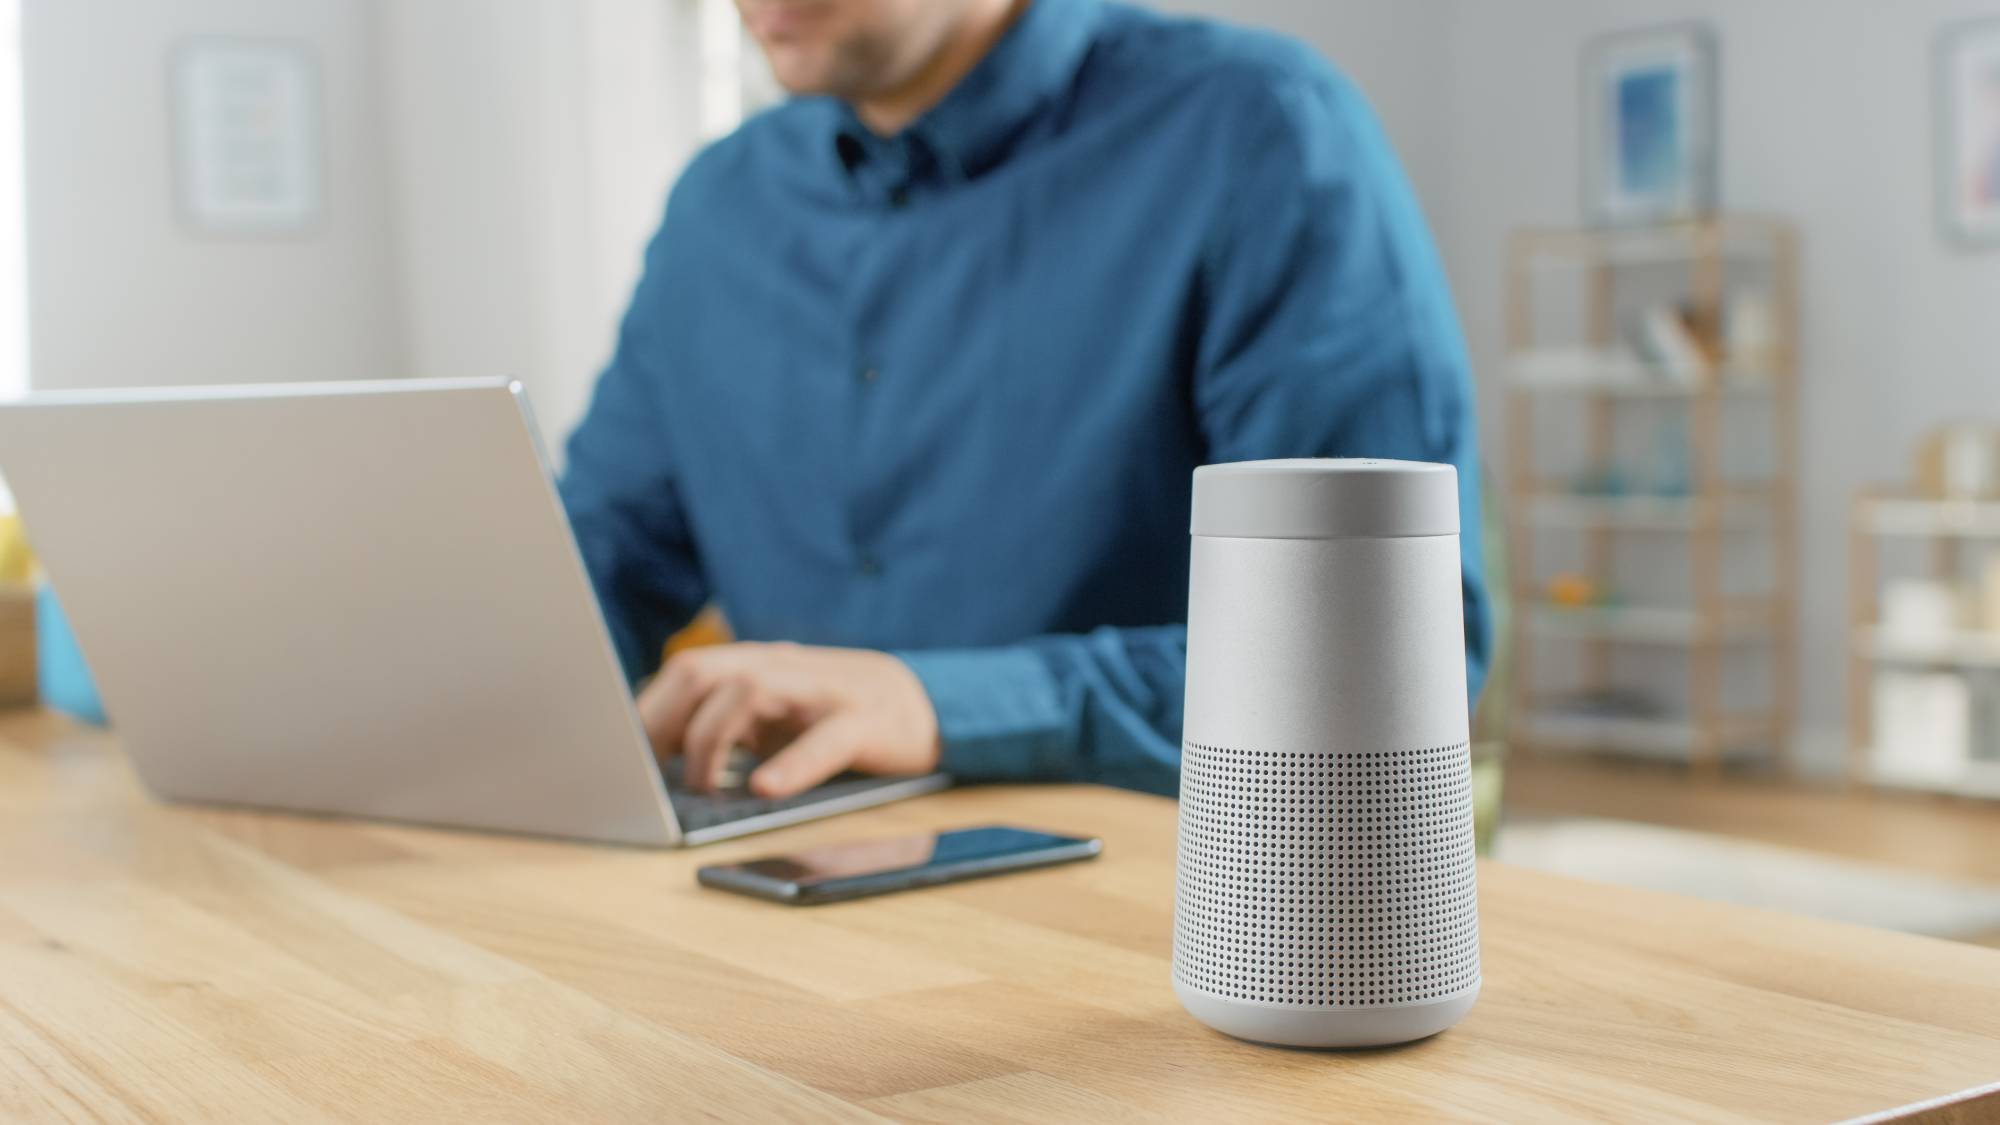 can-i-connect-a-wireless-speaker-to-my-laptop